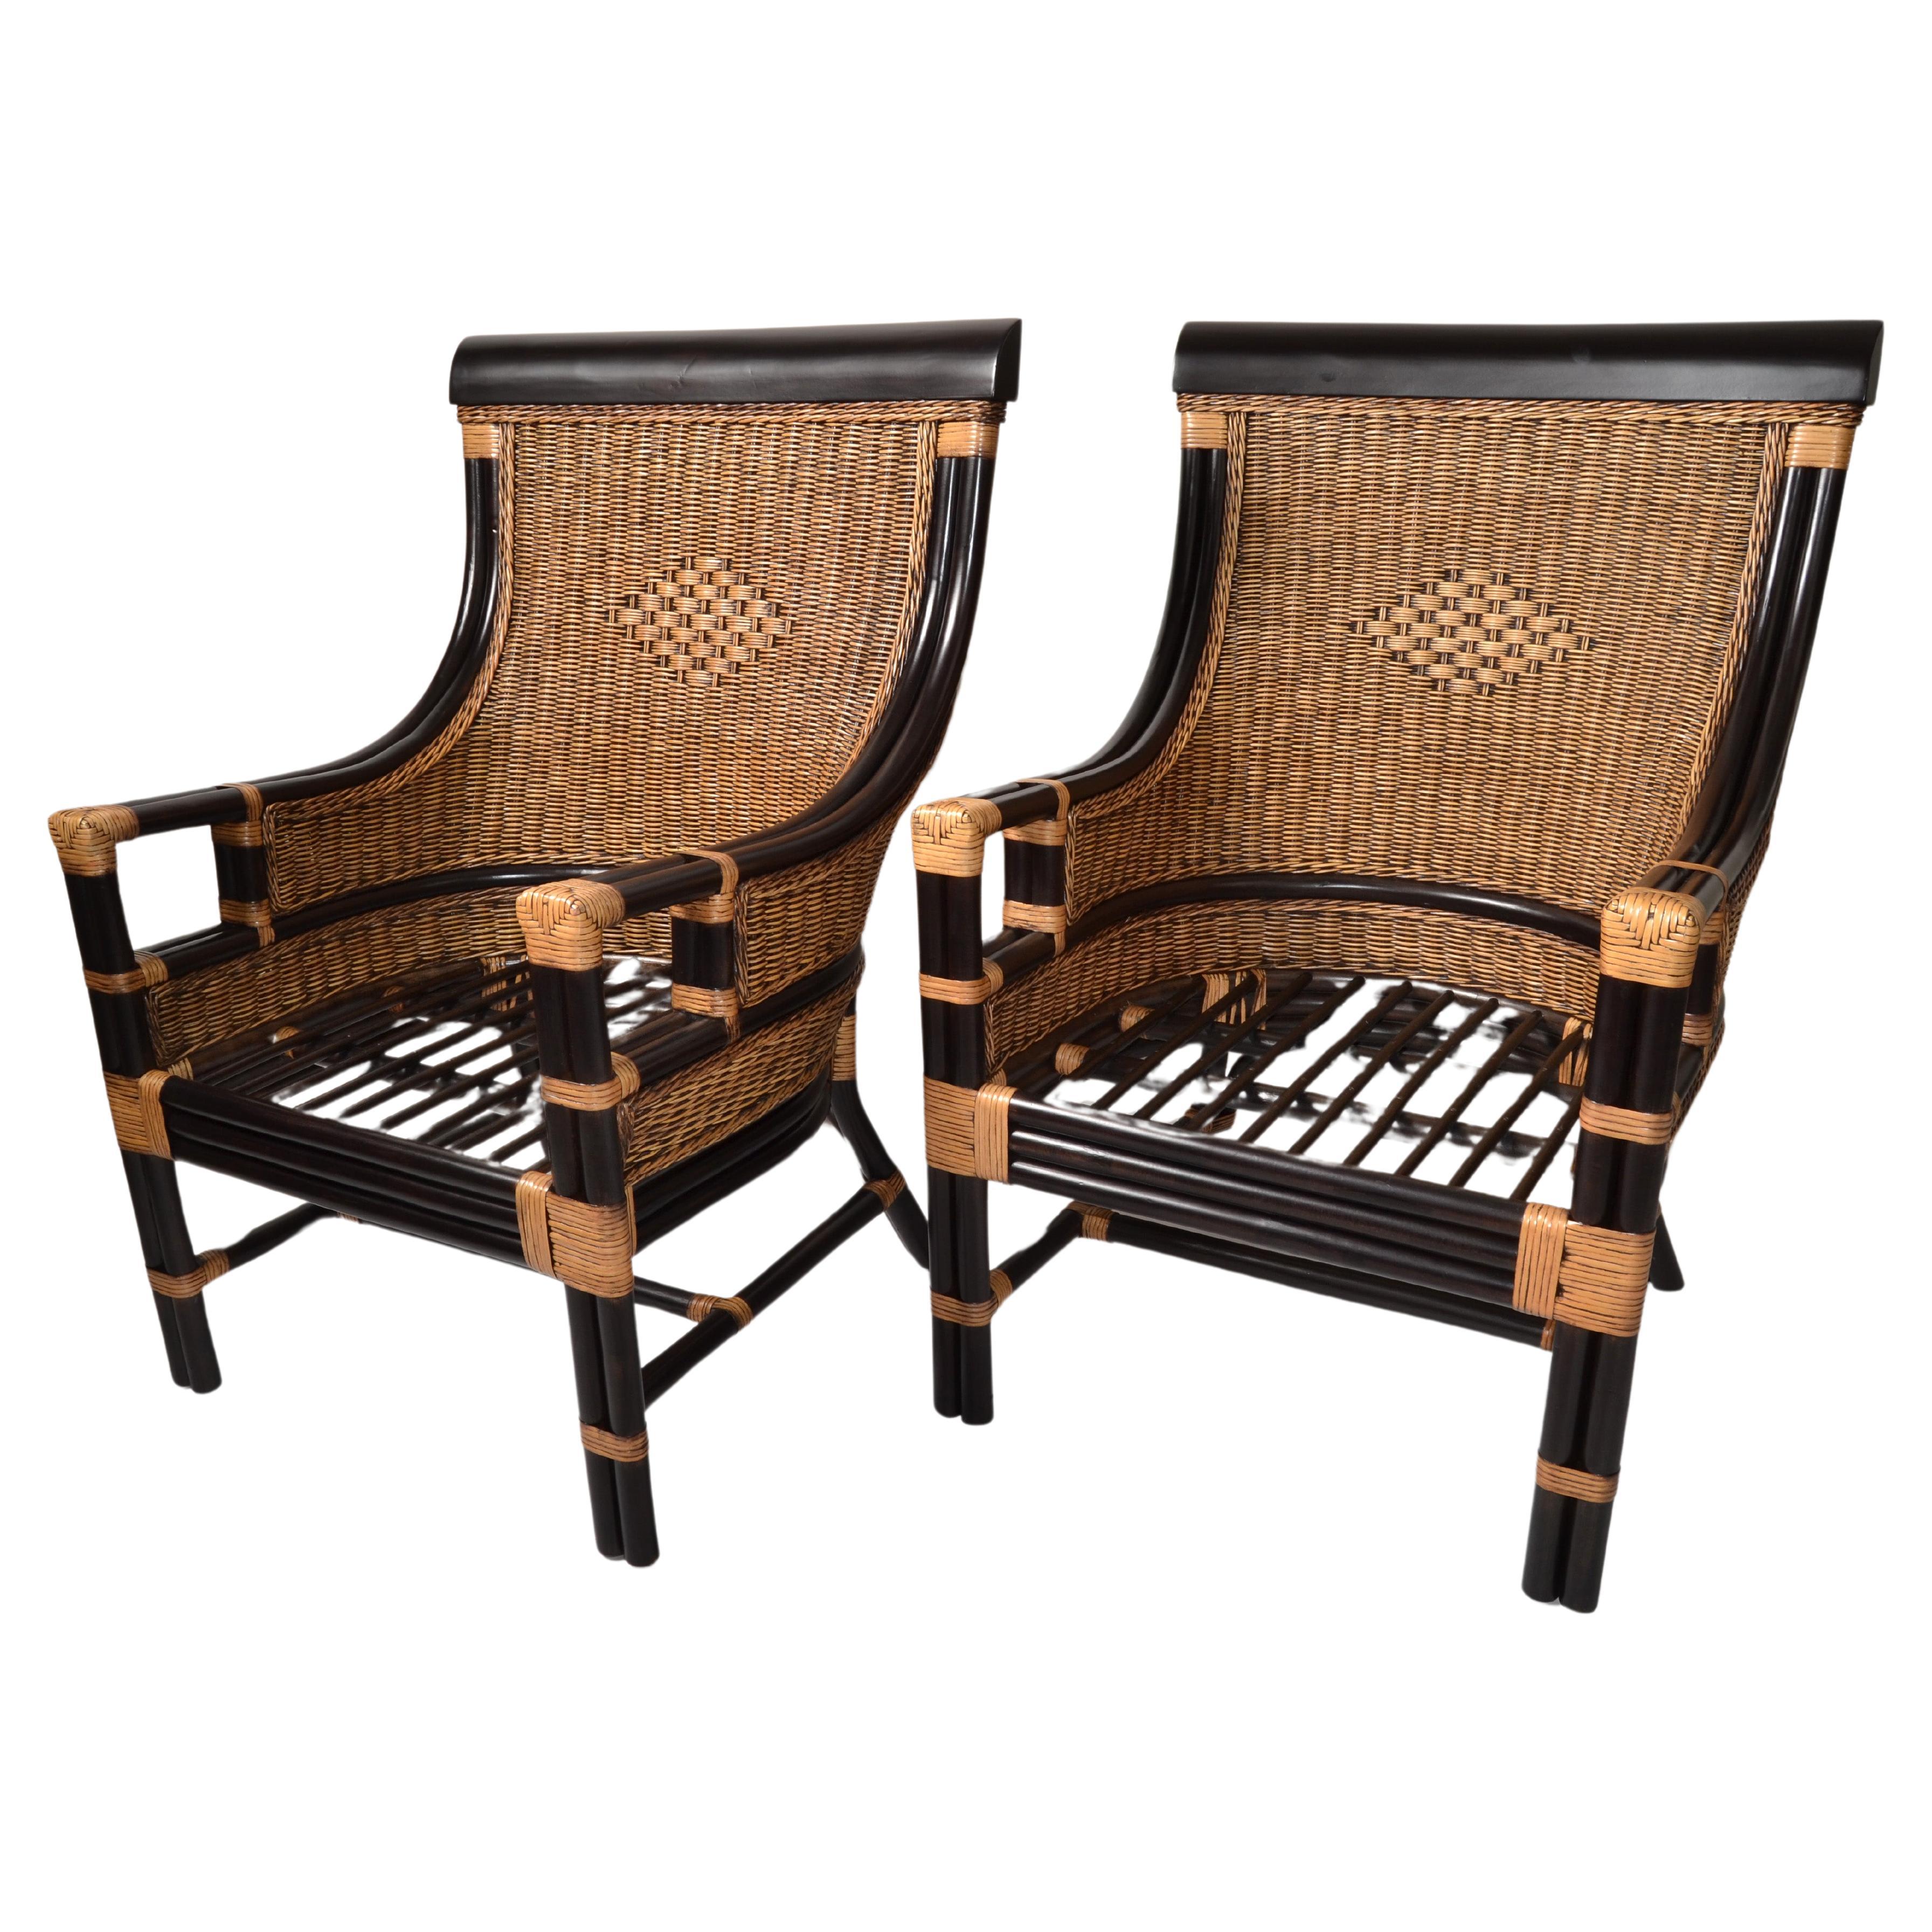 Boho Chic Mid-Century Modern large-scale ebony Bamboo and hand-woven Rattan Backrest, with an Asian inspired design.
These armchairs are constructed from durable Bamboo wood that ensures it will remain in pristine conditions for many years. 
The